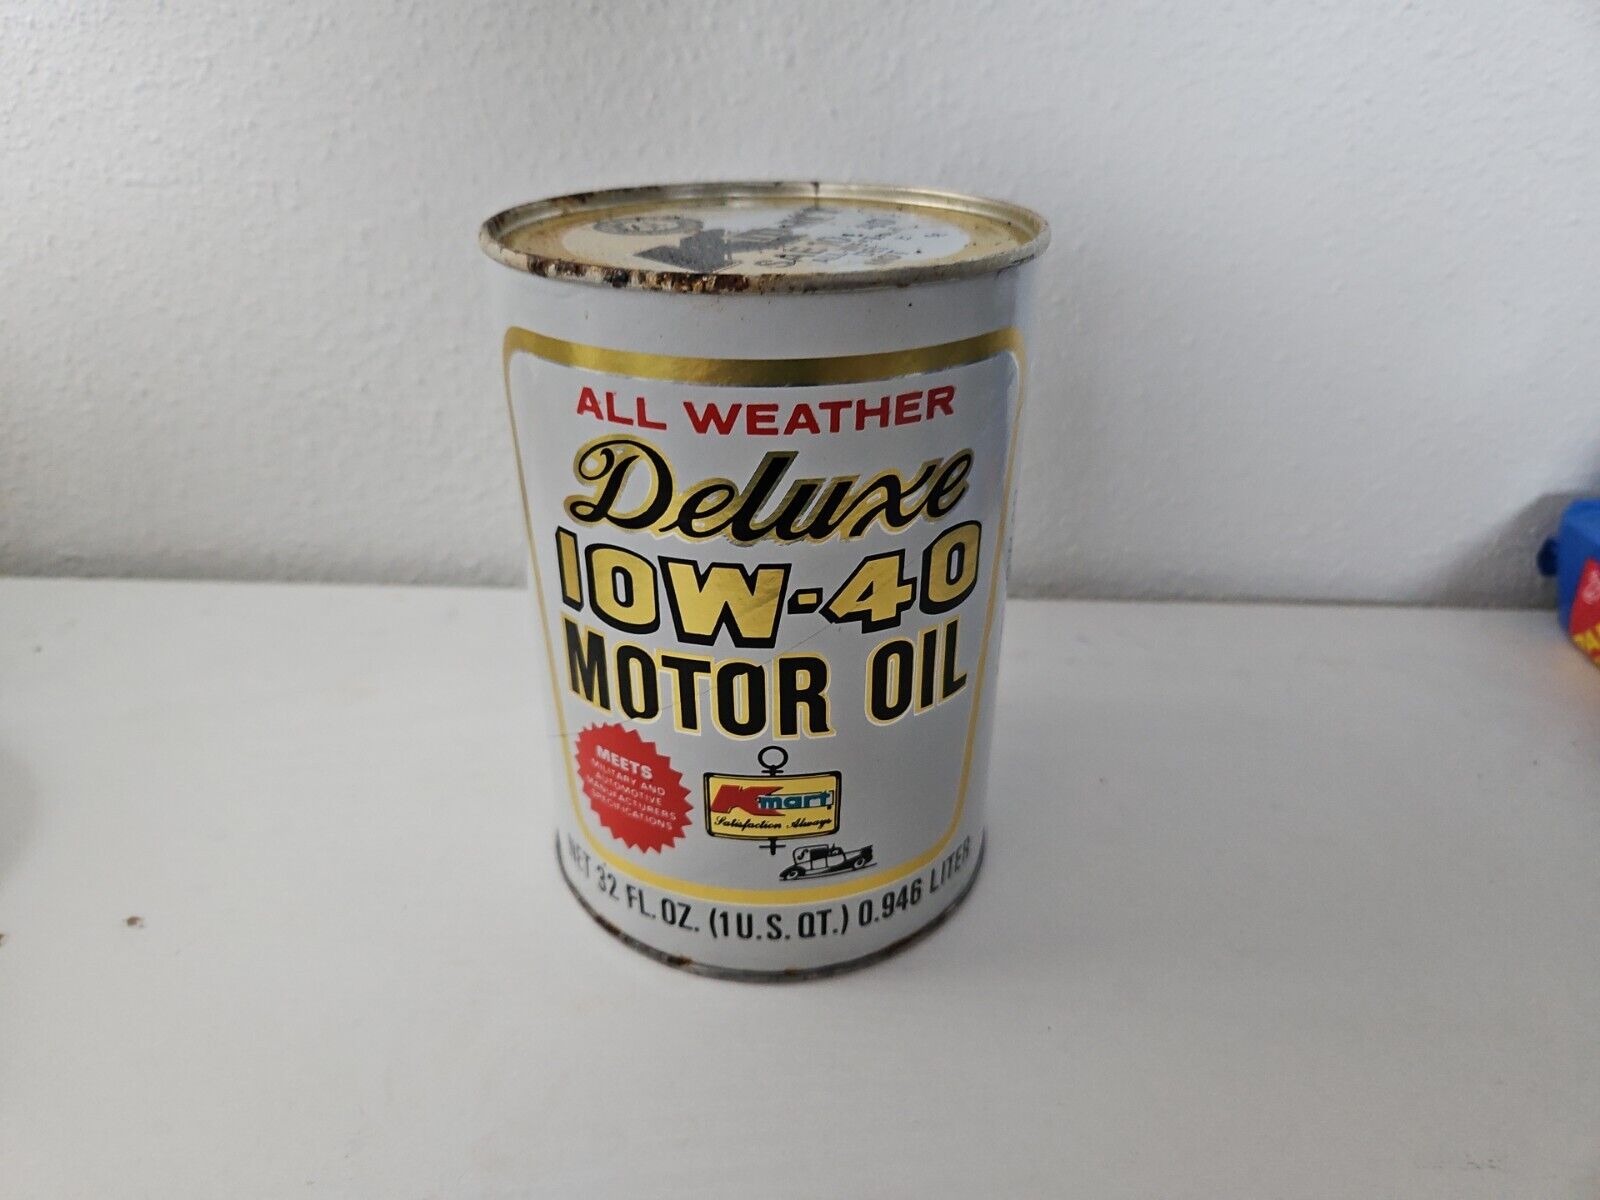 VINTAGE KMART 1-QUART ALL WEATHER DELUXE 10W-40 MOTOR OIL CAN, UNOPENED